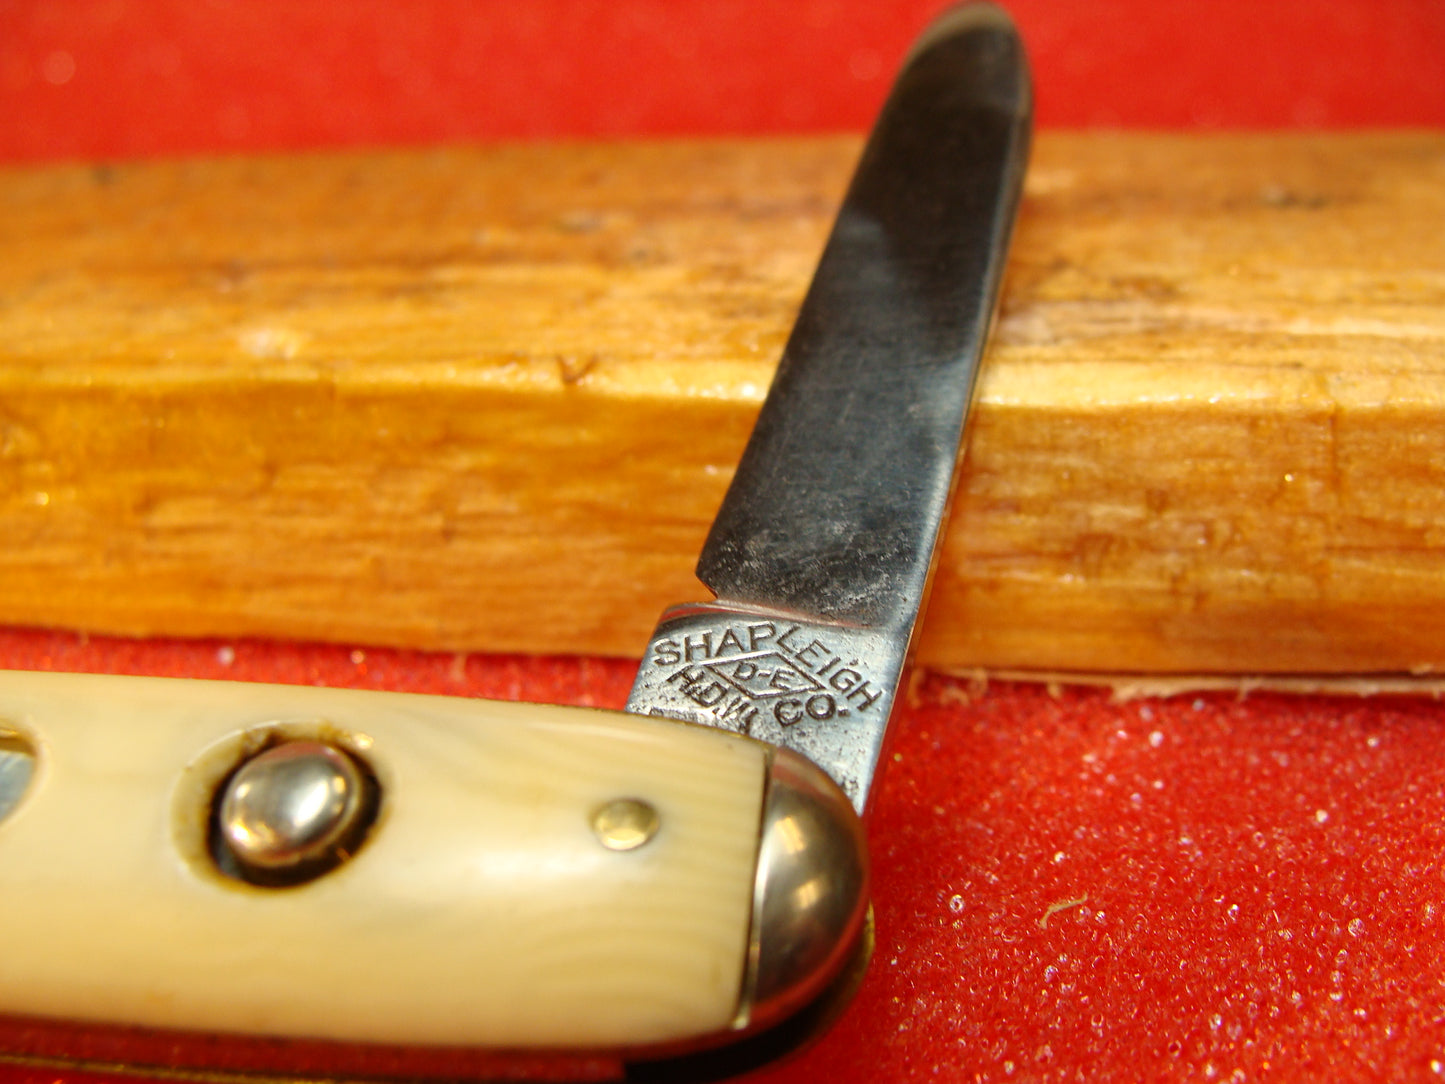 SHAPLEIGH HWD ST. LOUIS MO. DIAMOND EDGE 1910-16 VINTAGE AMERICAN AUTOMATIC KNIFE 3 3/8" DOUBLE BLADE SILVER TIP BOLSTERS IMITATION IVORY HANDLES